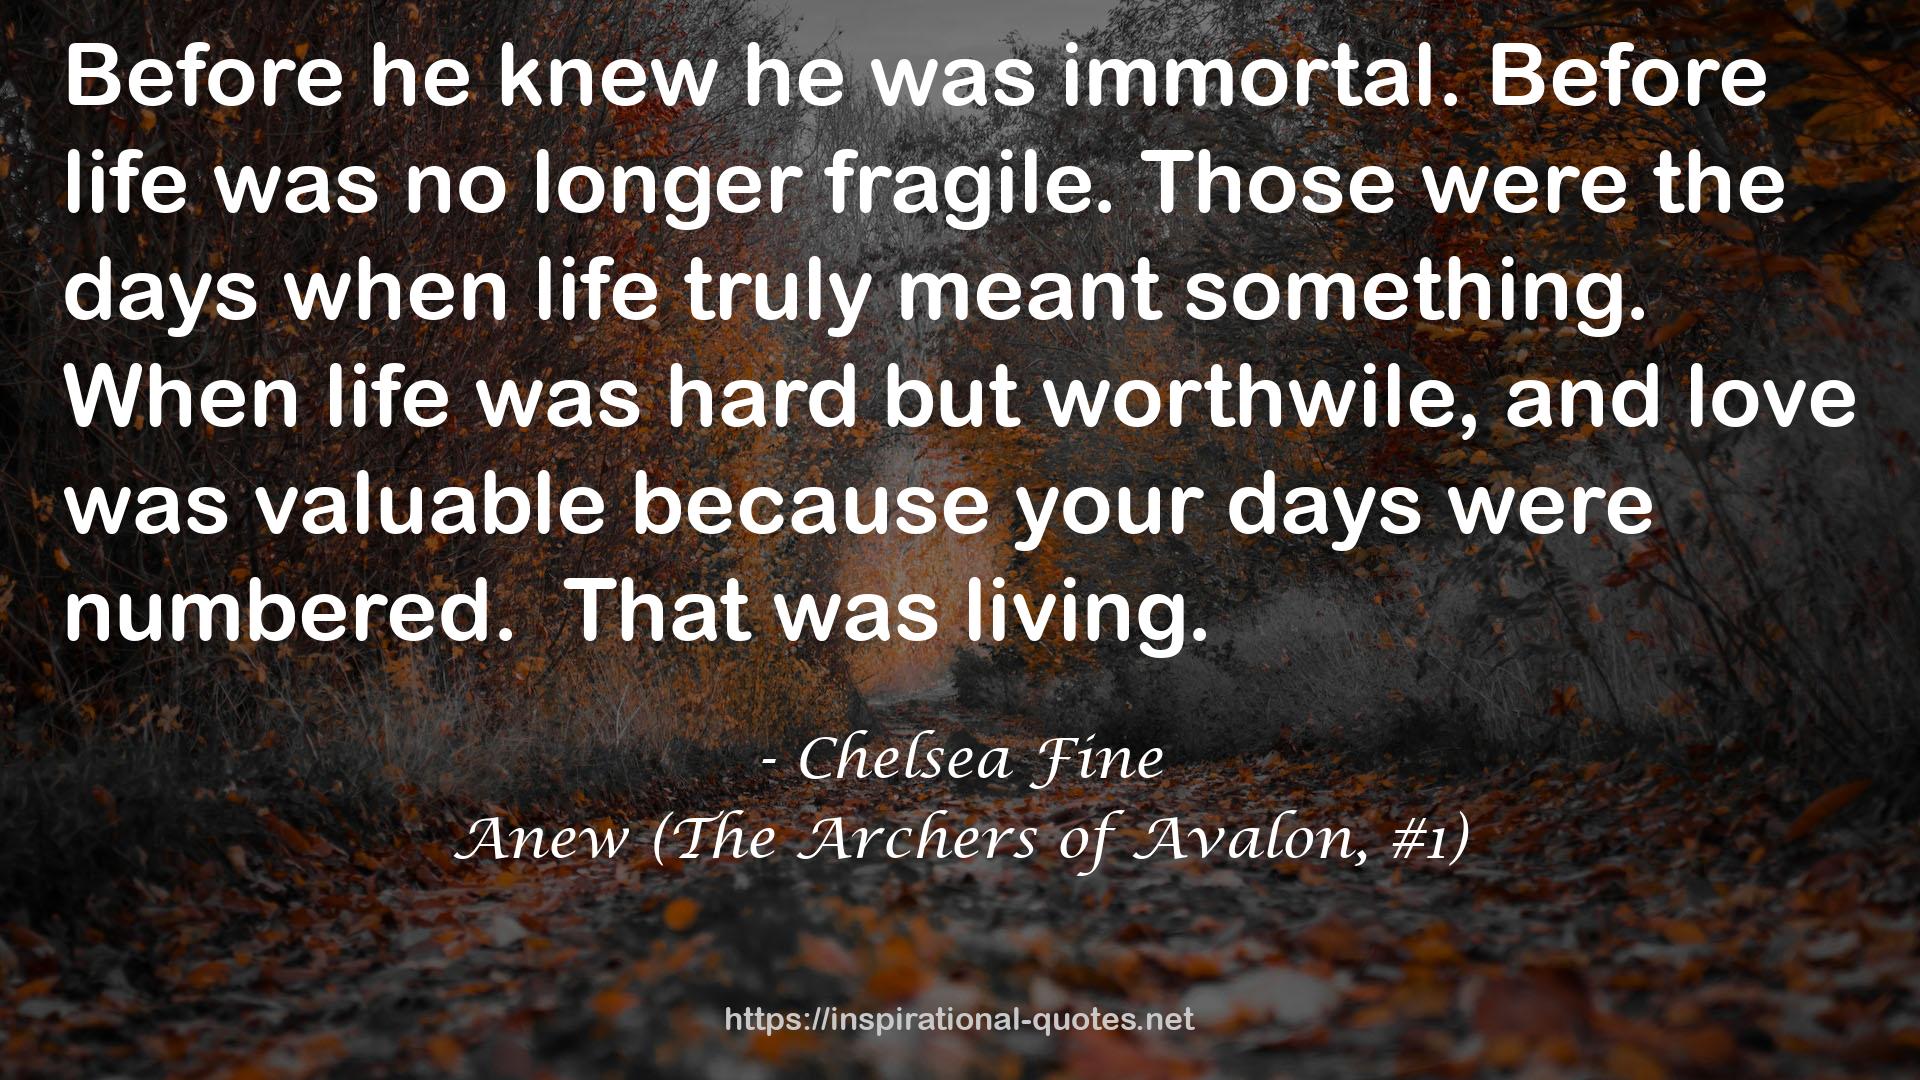 Anew (The Archers of Avalon, #1) QUOTES